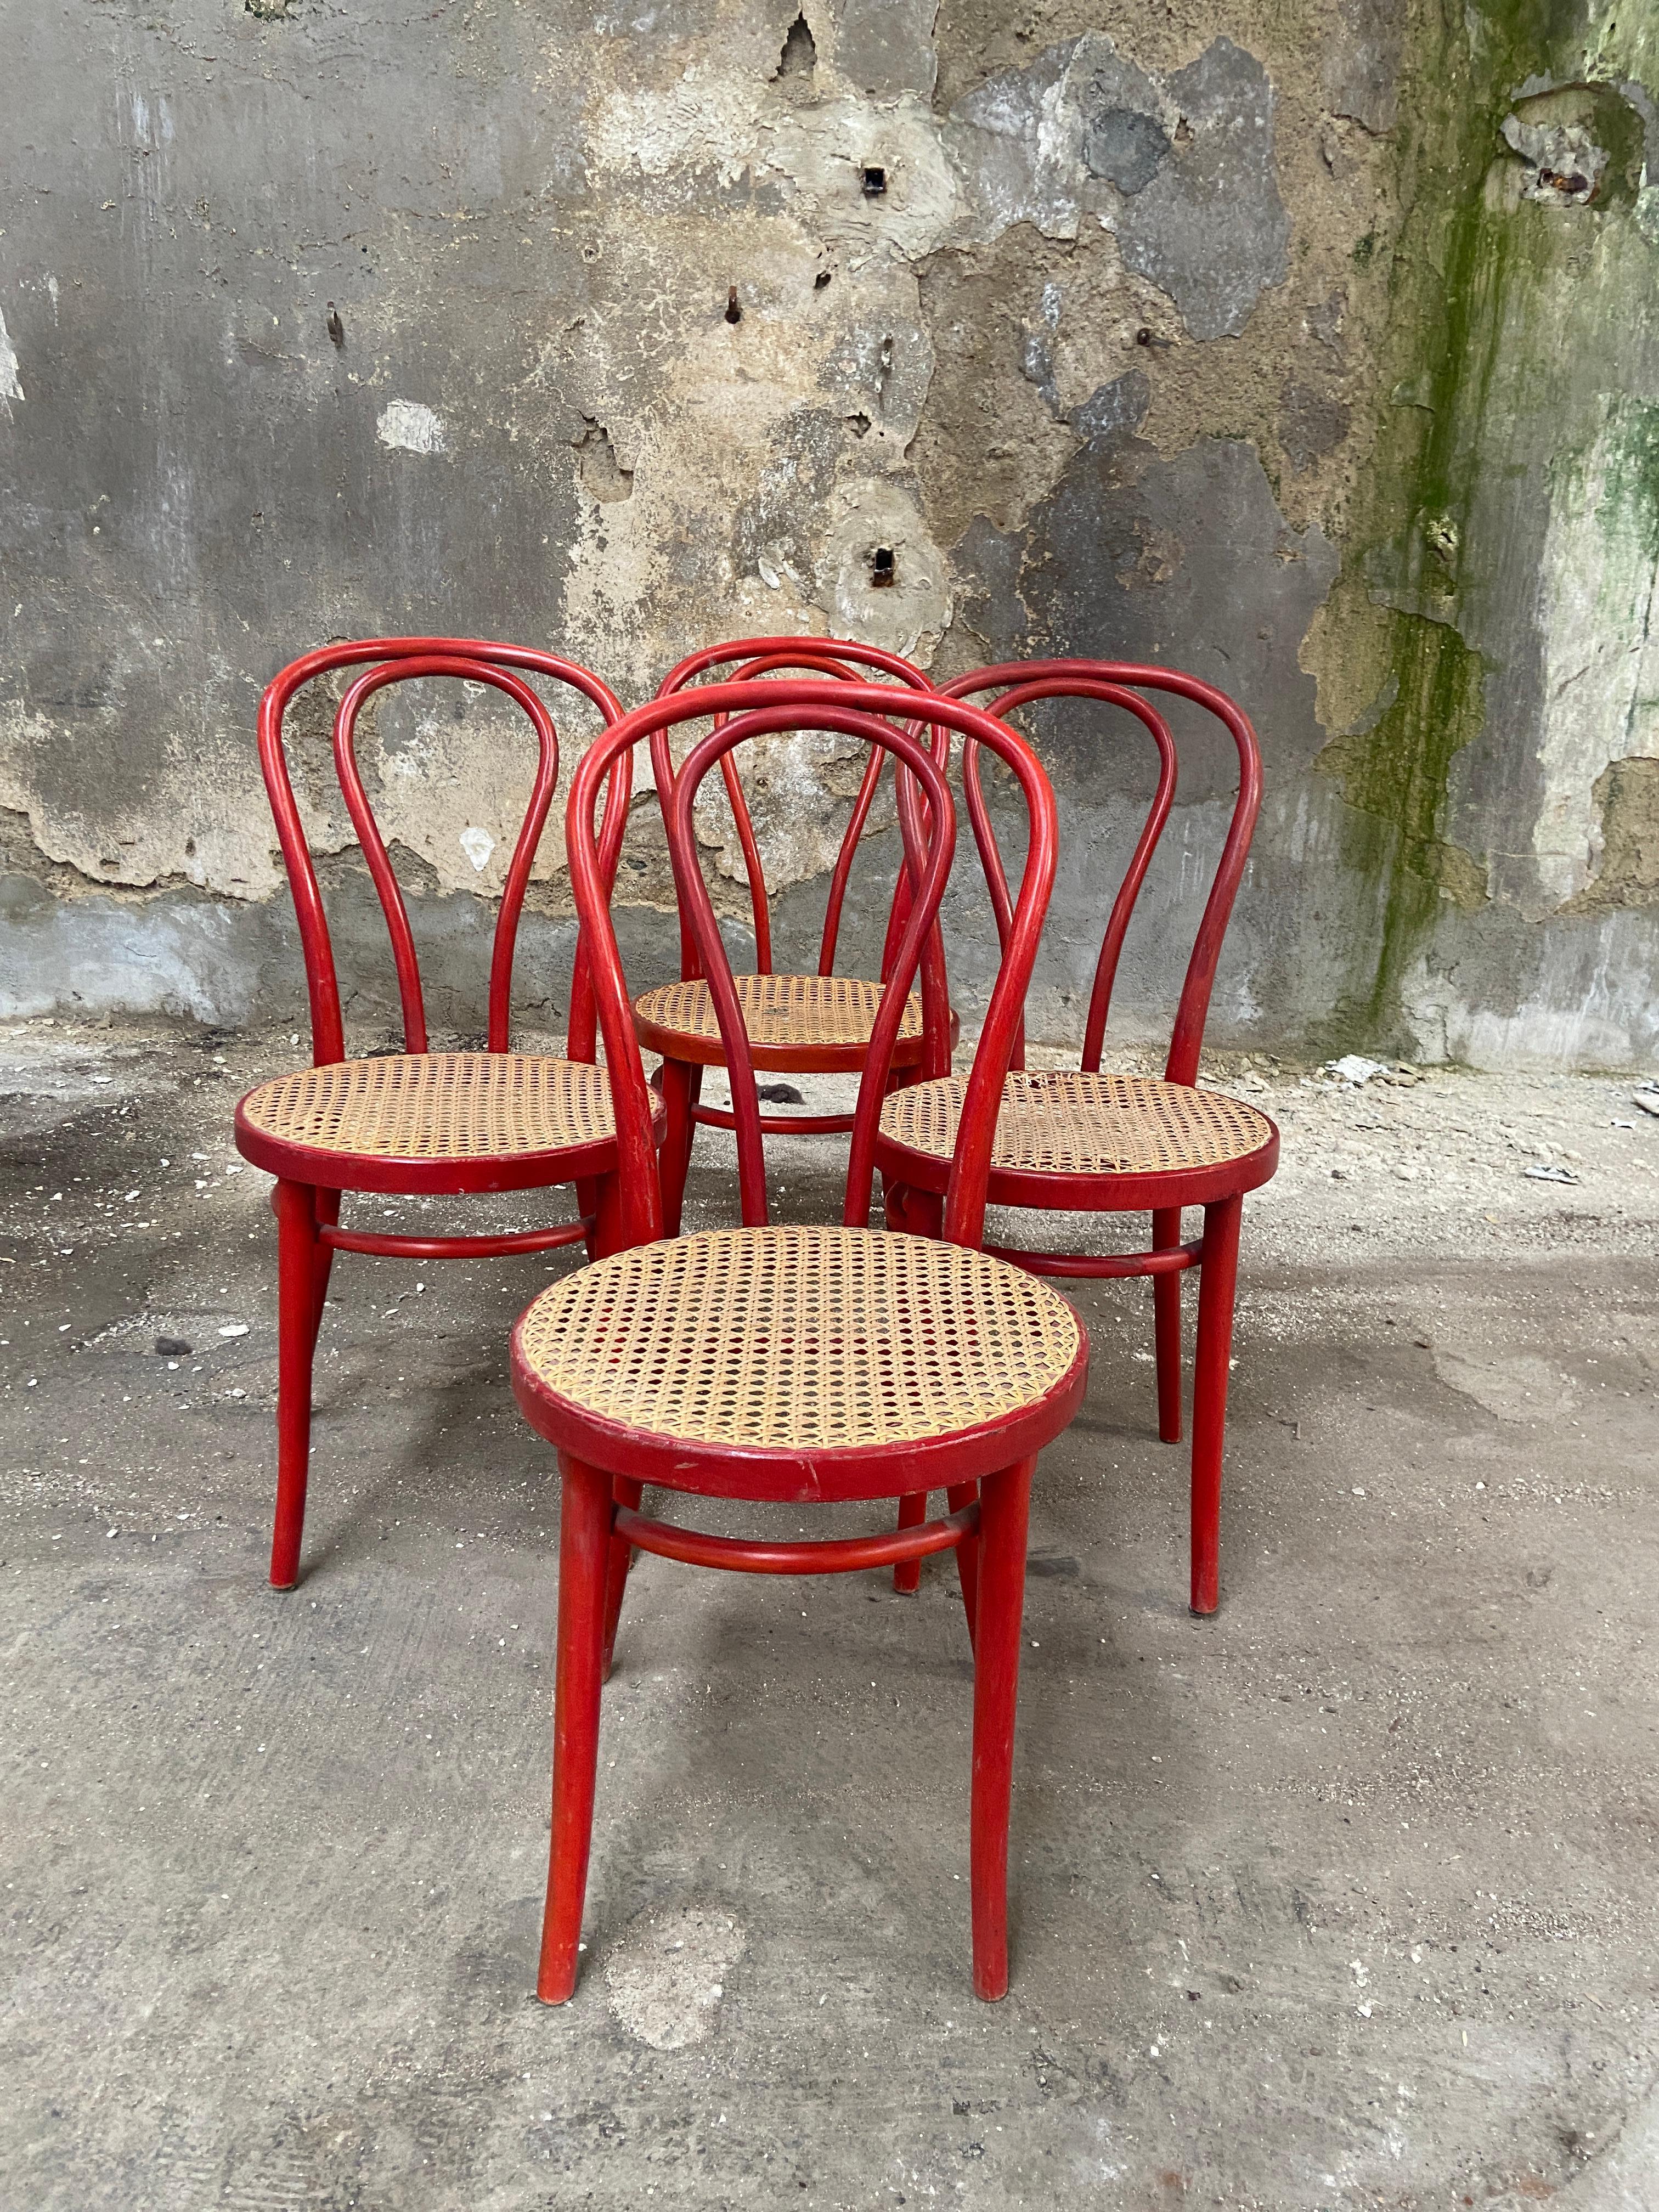 This no.18 chair was designed by Gebrüder Thonet around 1875 and was one of the most popular chairs of Thonet. This set of 4 chairs was manufactured by ZPM Radomsko in the 1960s. They are numbered and got aZPM Radomsko label underneath the seat. The